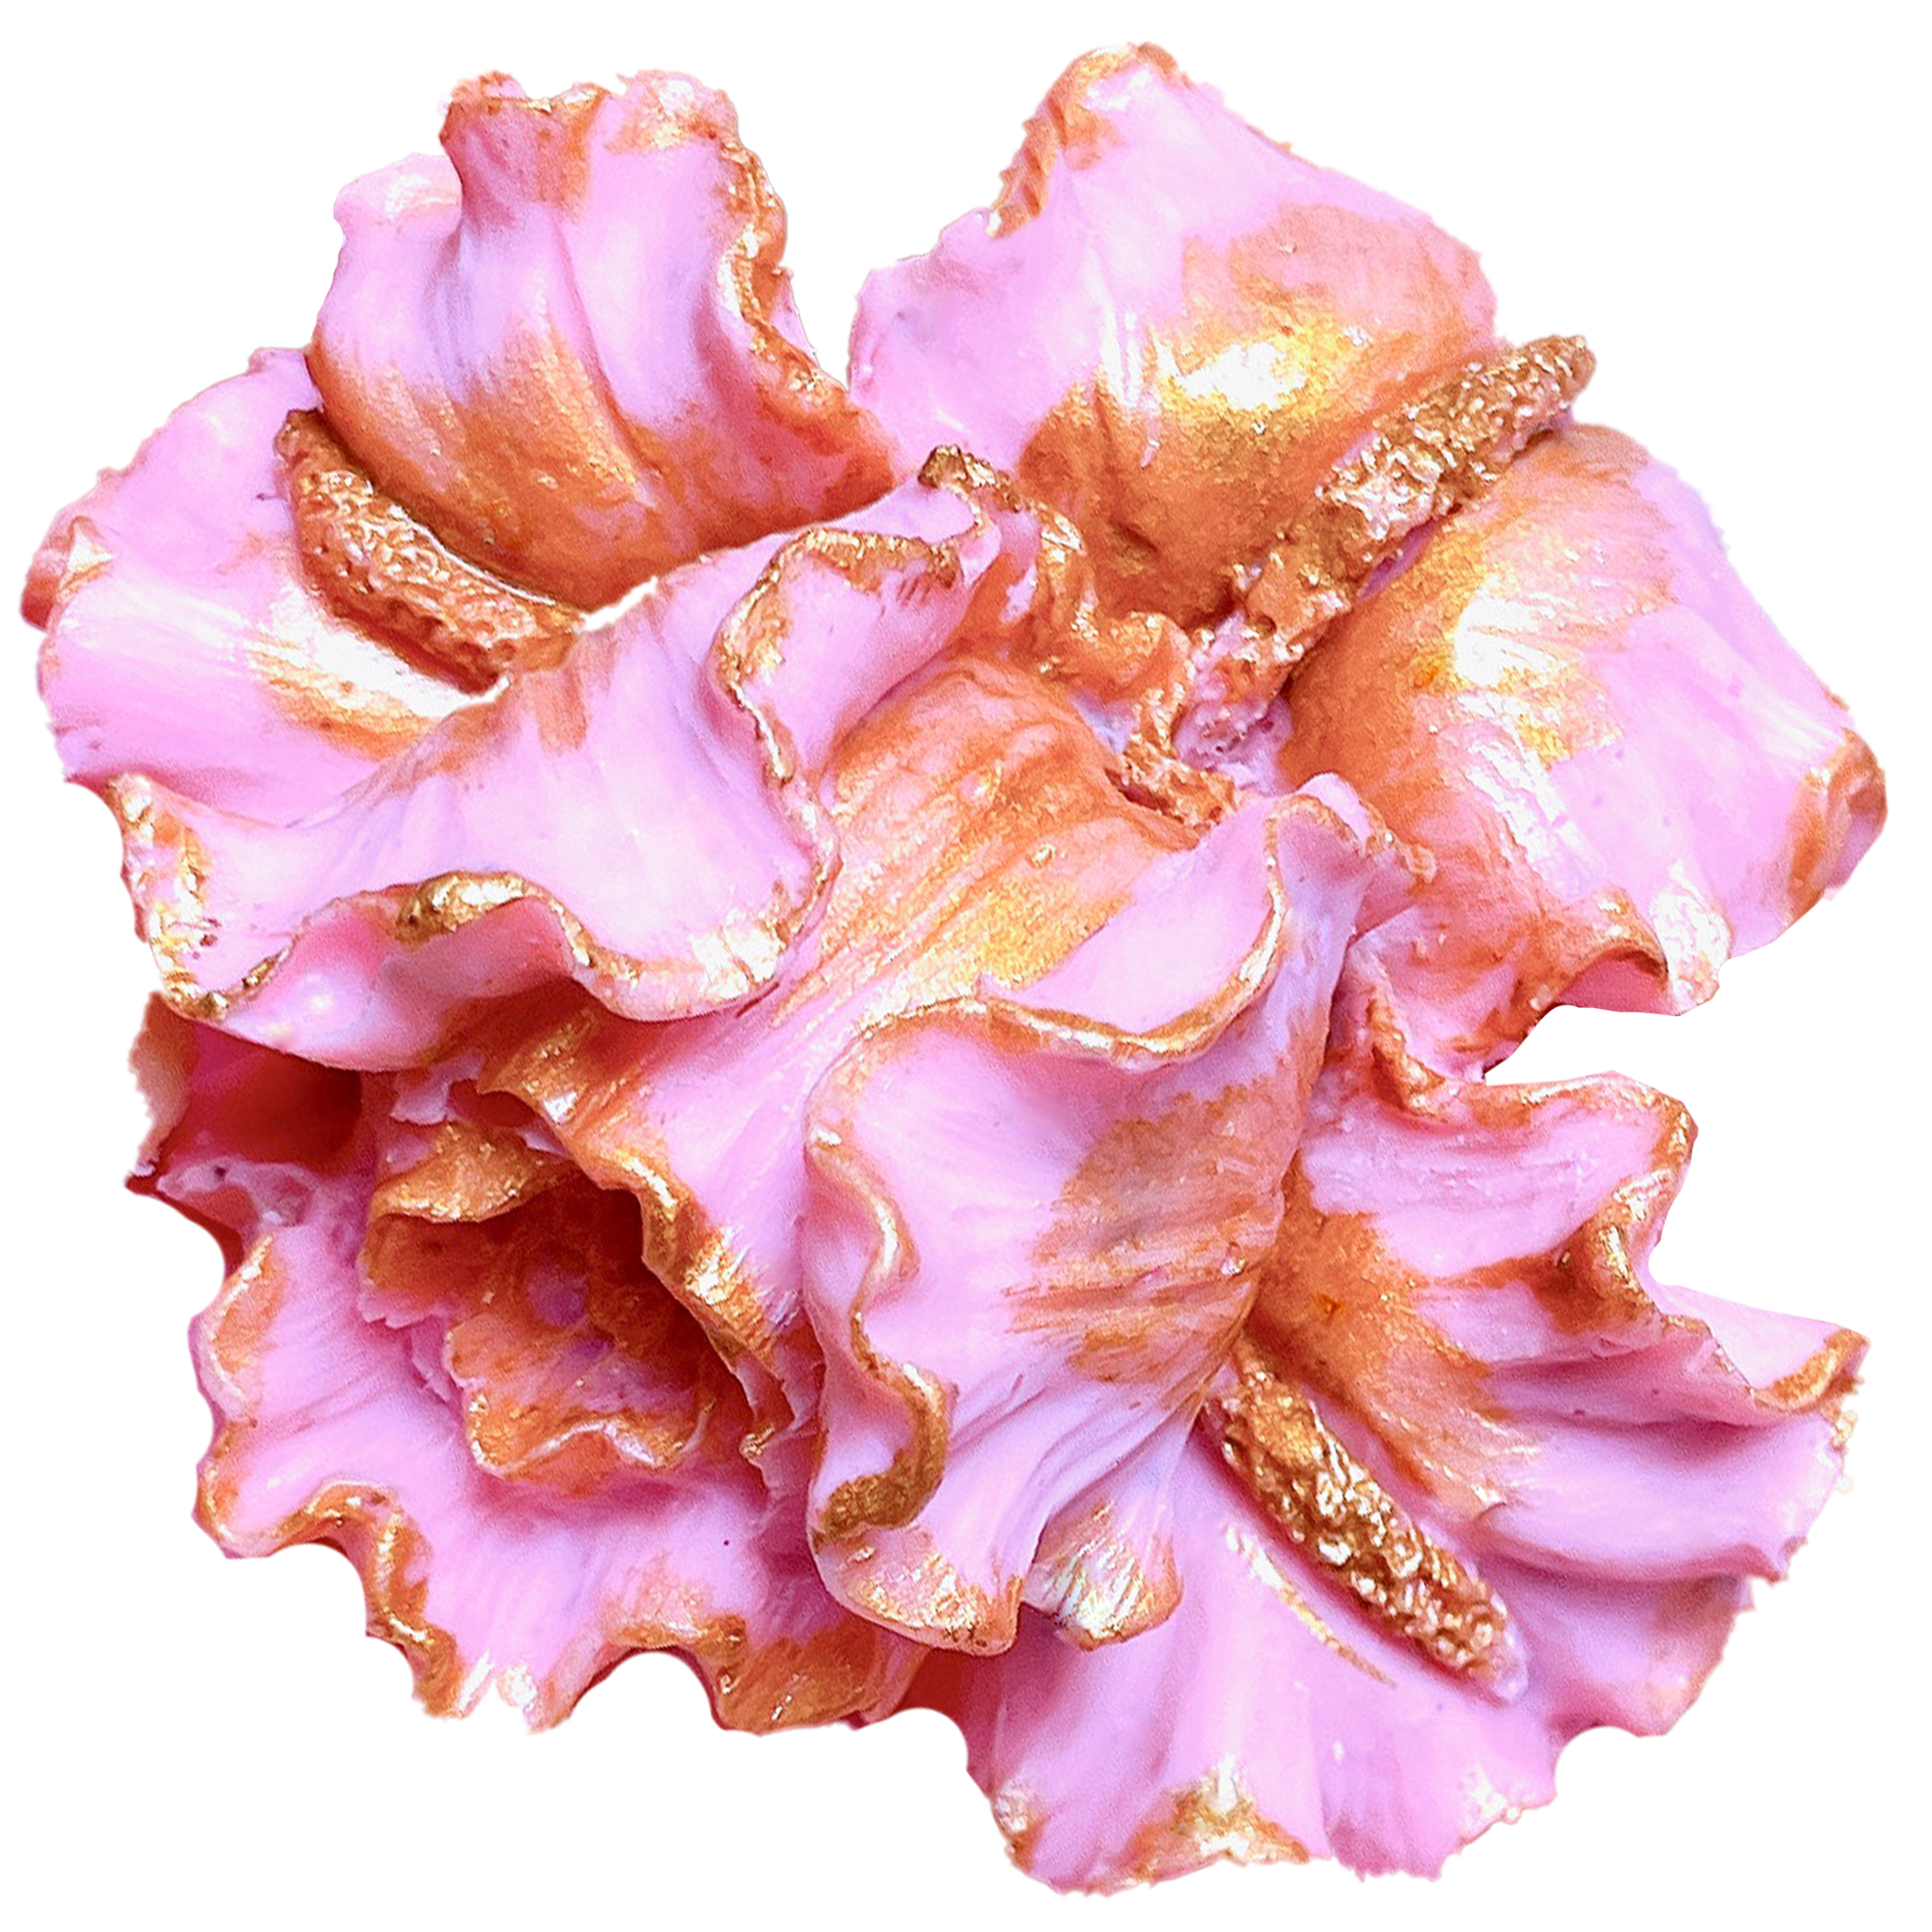 3D Pink Chocolate Flower Orchid is a handcrafted art piece. This flower is made of tinted White Chocolate and filled with marshmallows and dried fruits/berries.